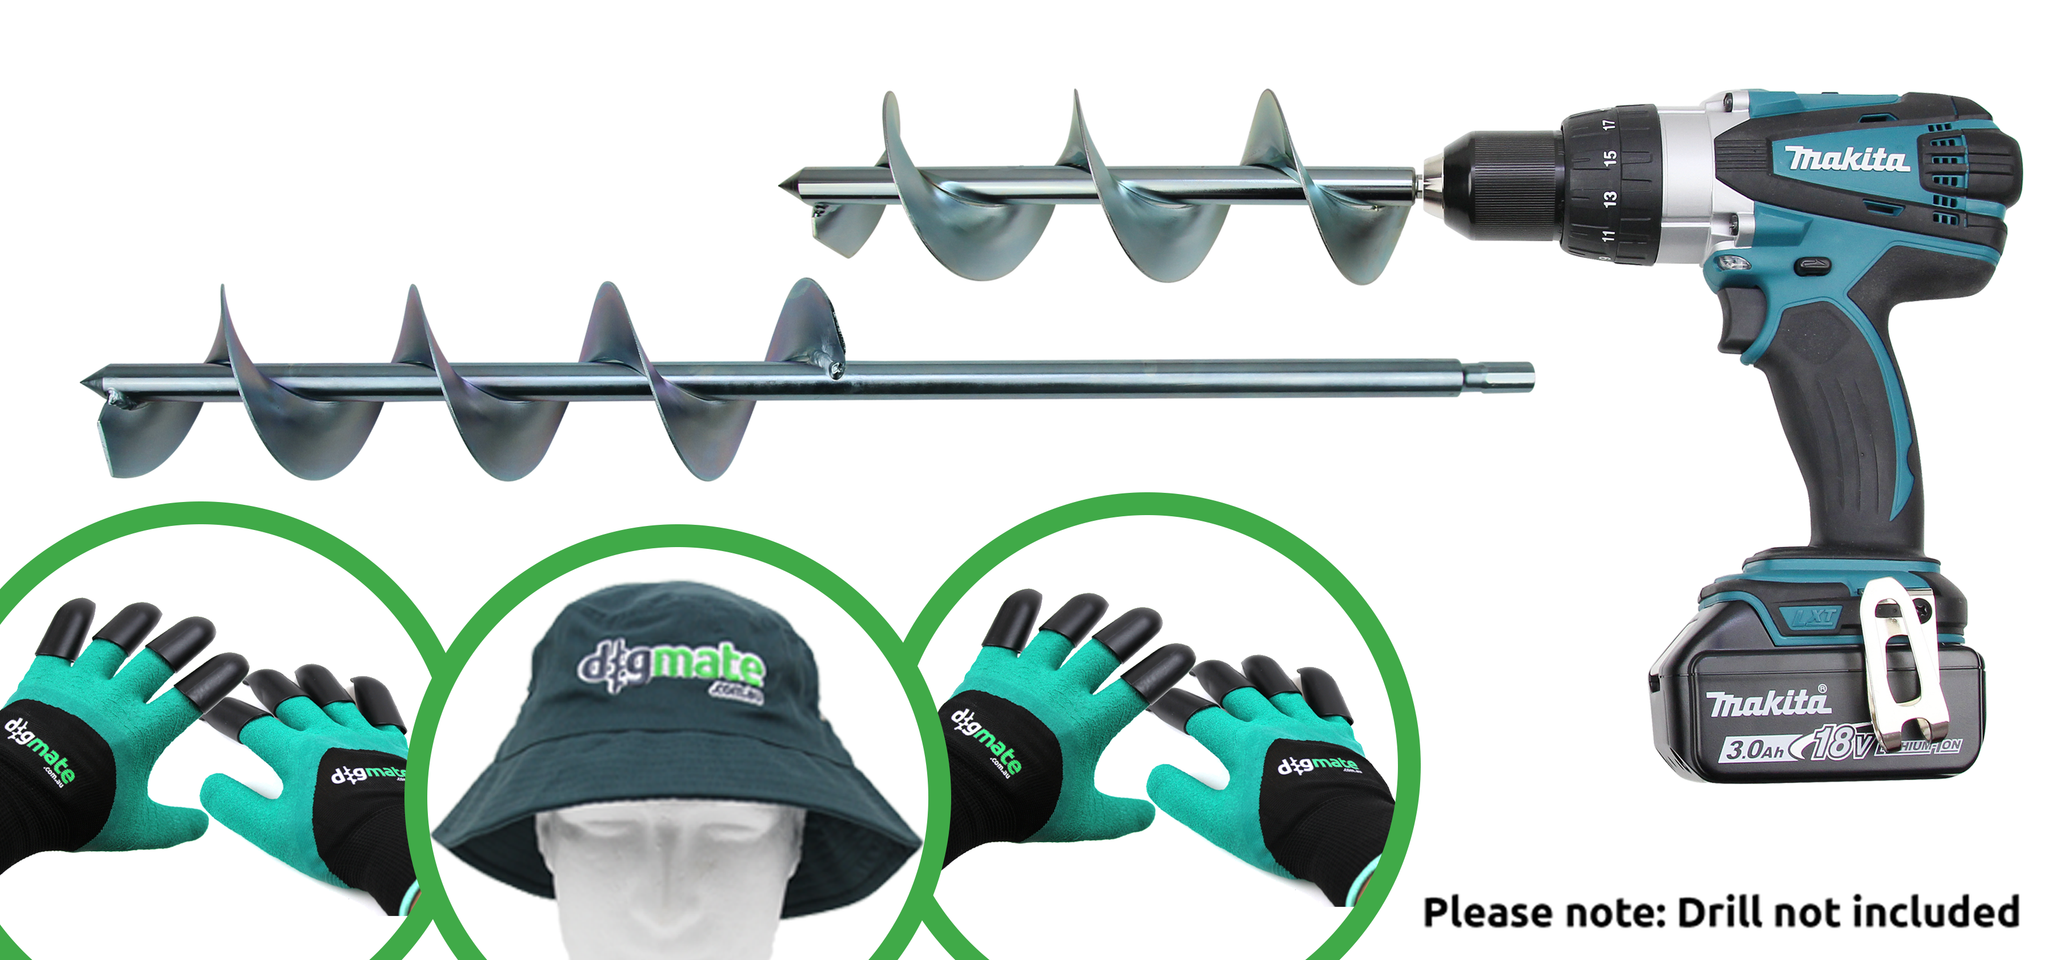 Digmate Garden Lovers Pack - (Medium & Large Digmate, Two pairs of Claw gloves, and bucket hat)